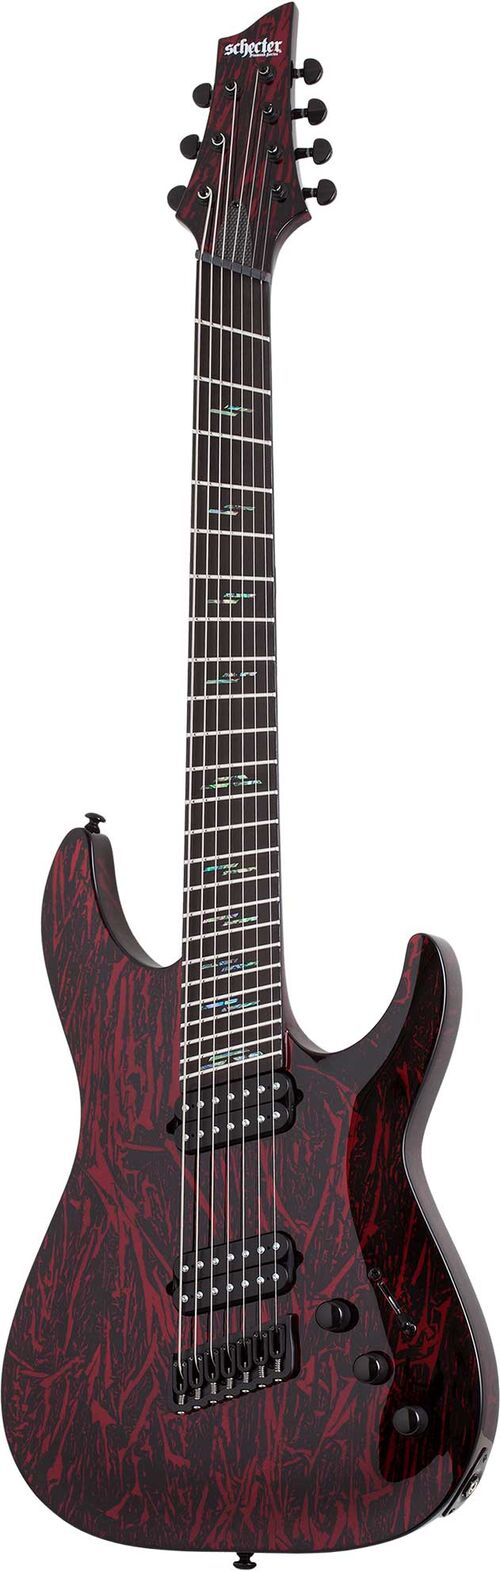 C-7 Ms Silver Moutain Blood Mo Schecter